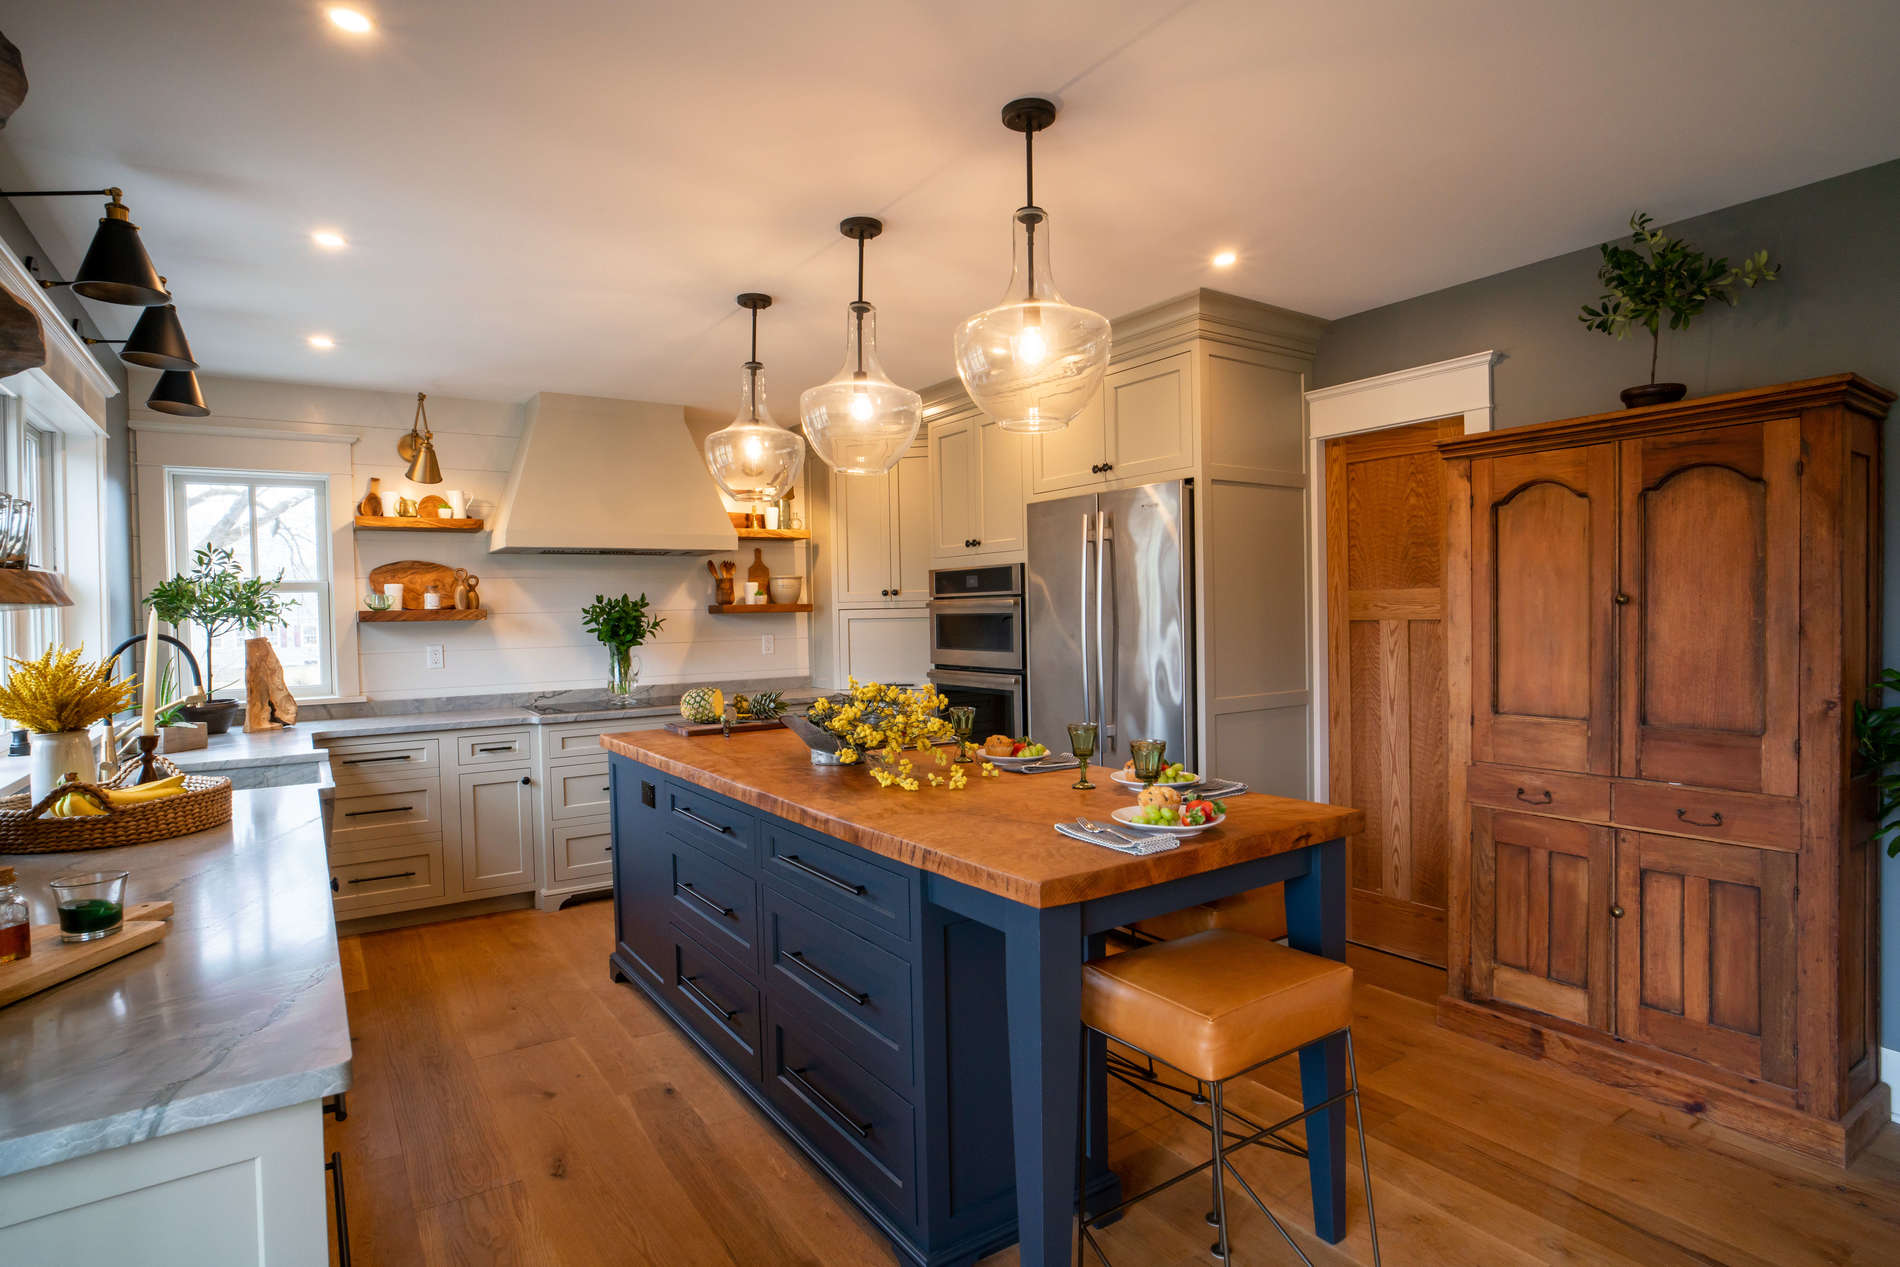 Top 5 Reasons Why You Should Choose Custom Cabinets Over Semi-Custom -  villagehandcrafted